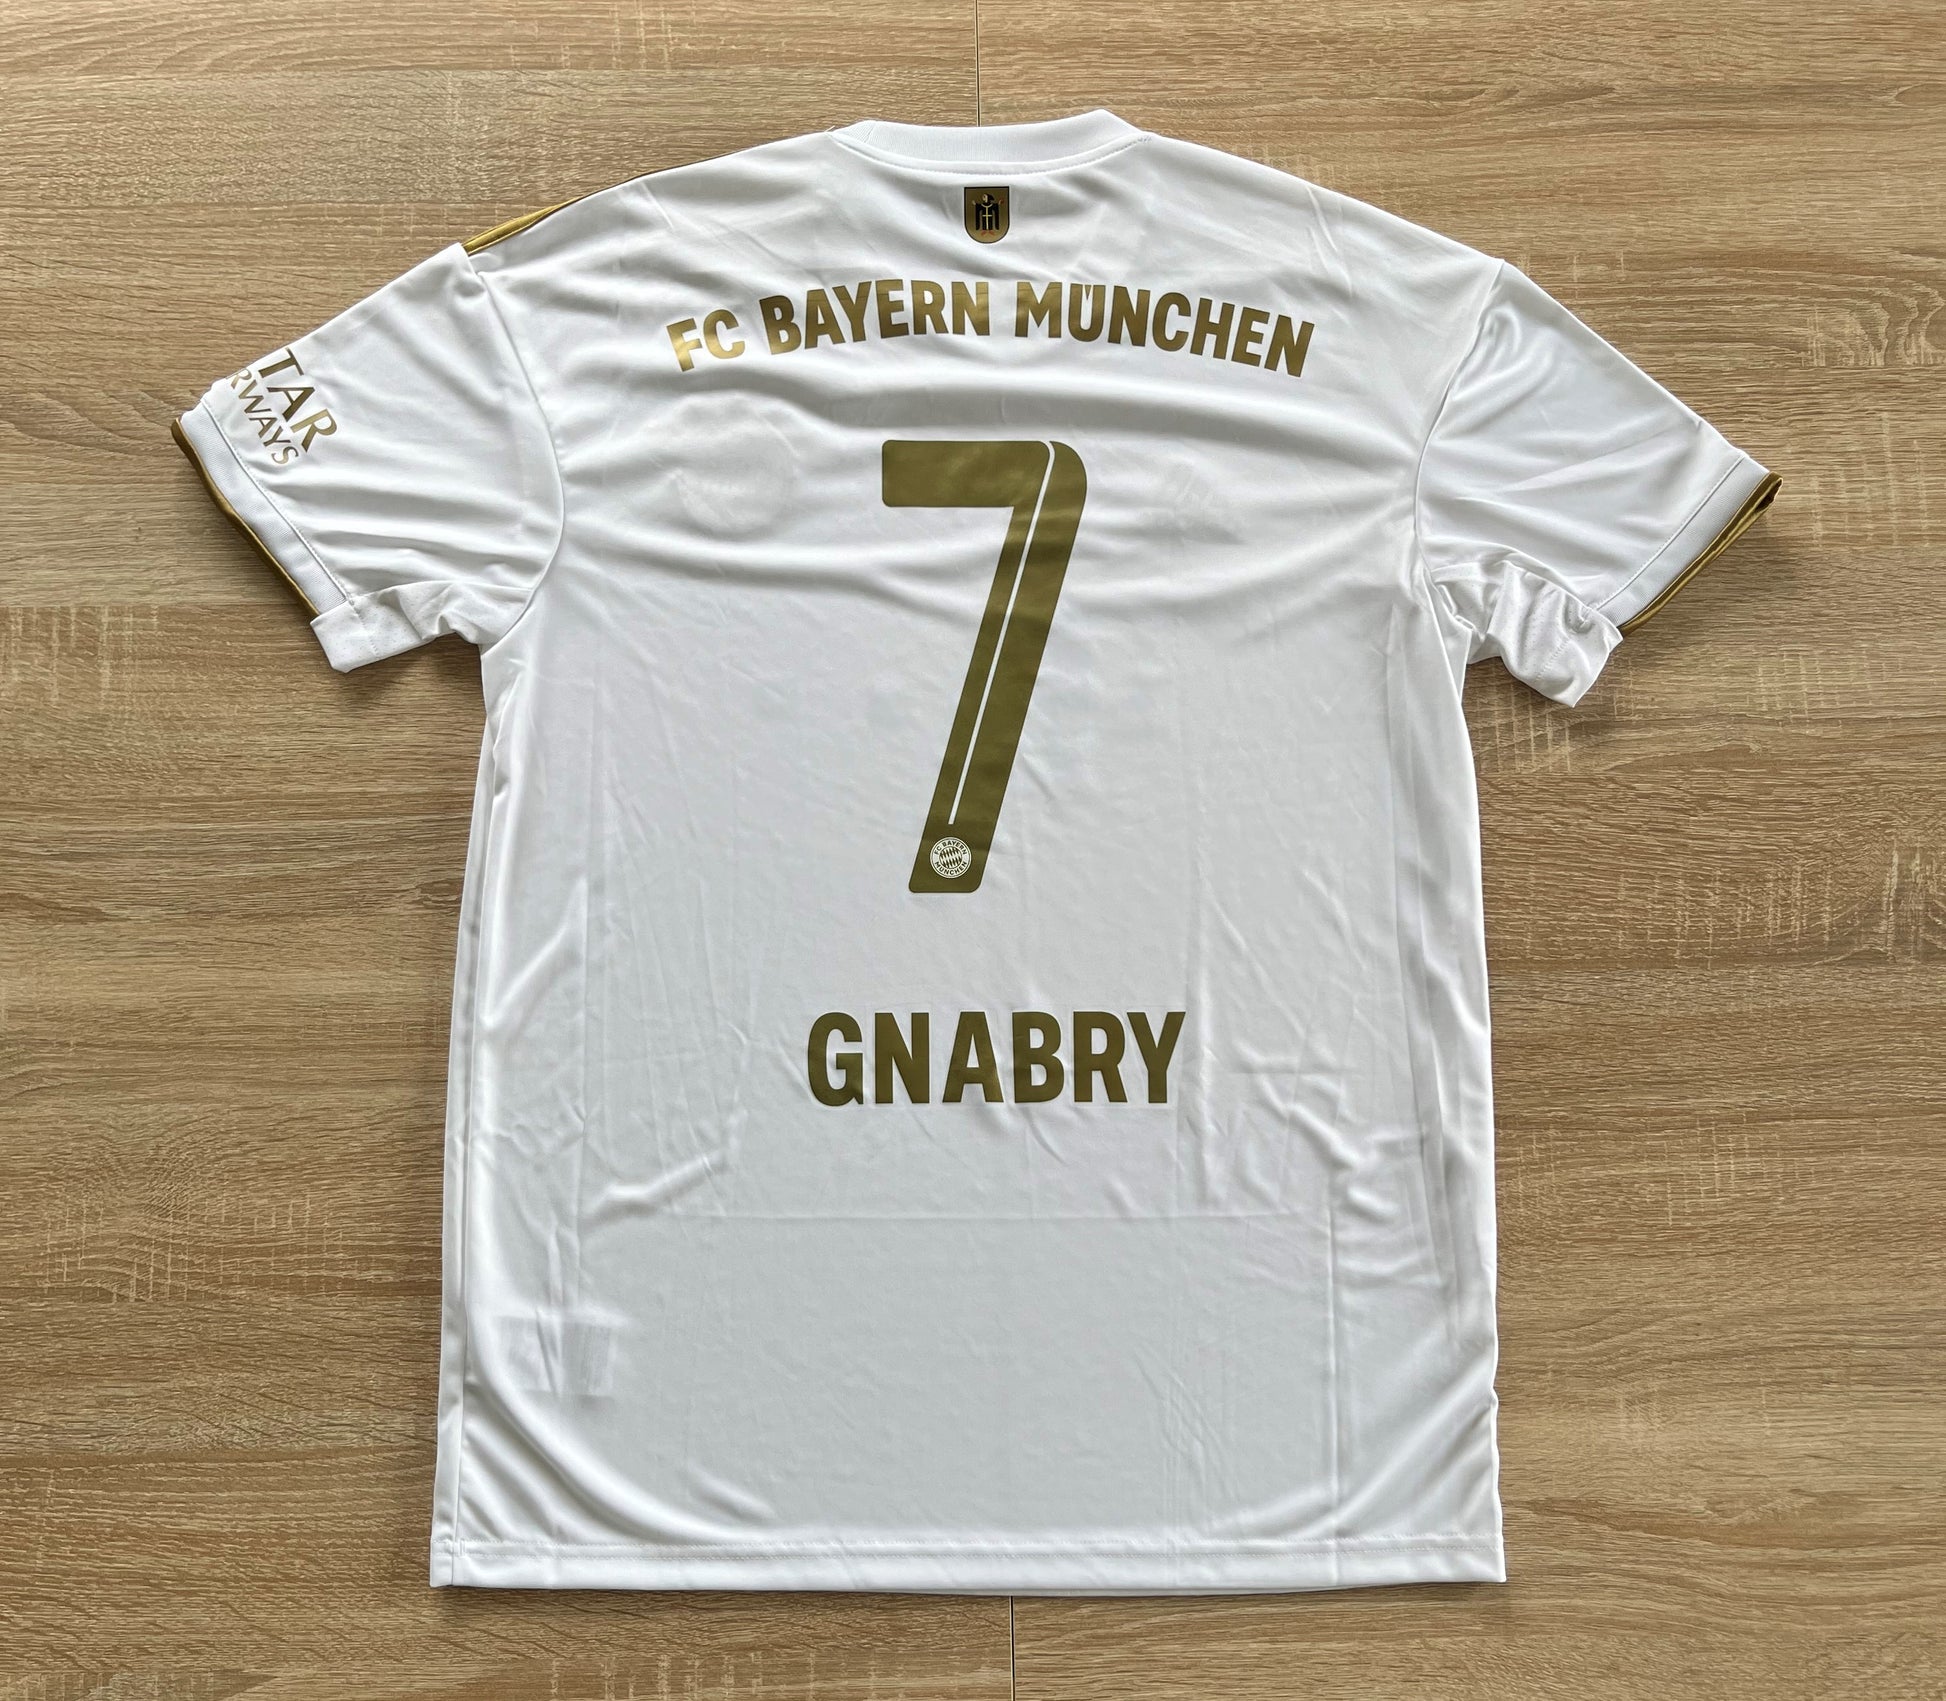 Bayern Munich Away Shirt from 2022-2023: Worn by Gnabry with the number 7, this jersey represents Bayern Munich's away kit during the 2022-2023 season. Featuring a unique design and the club's emblem, it symbolizes the team's identity and performance on the field.